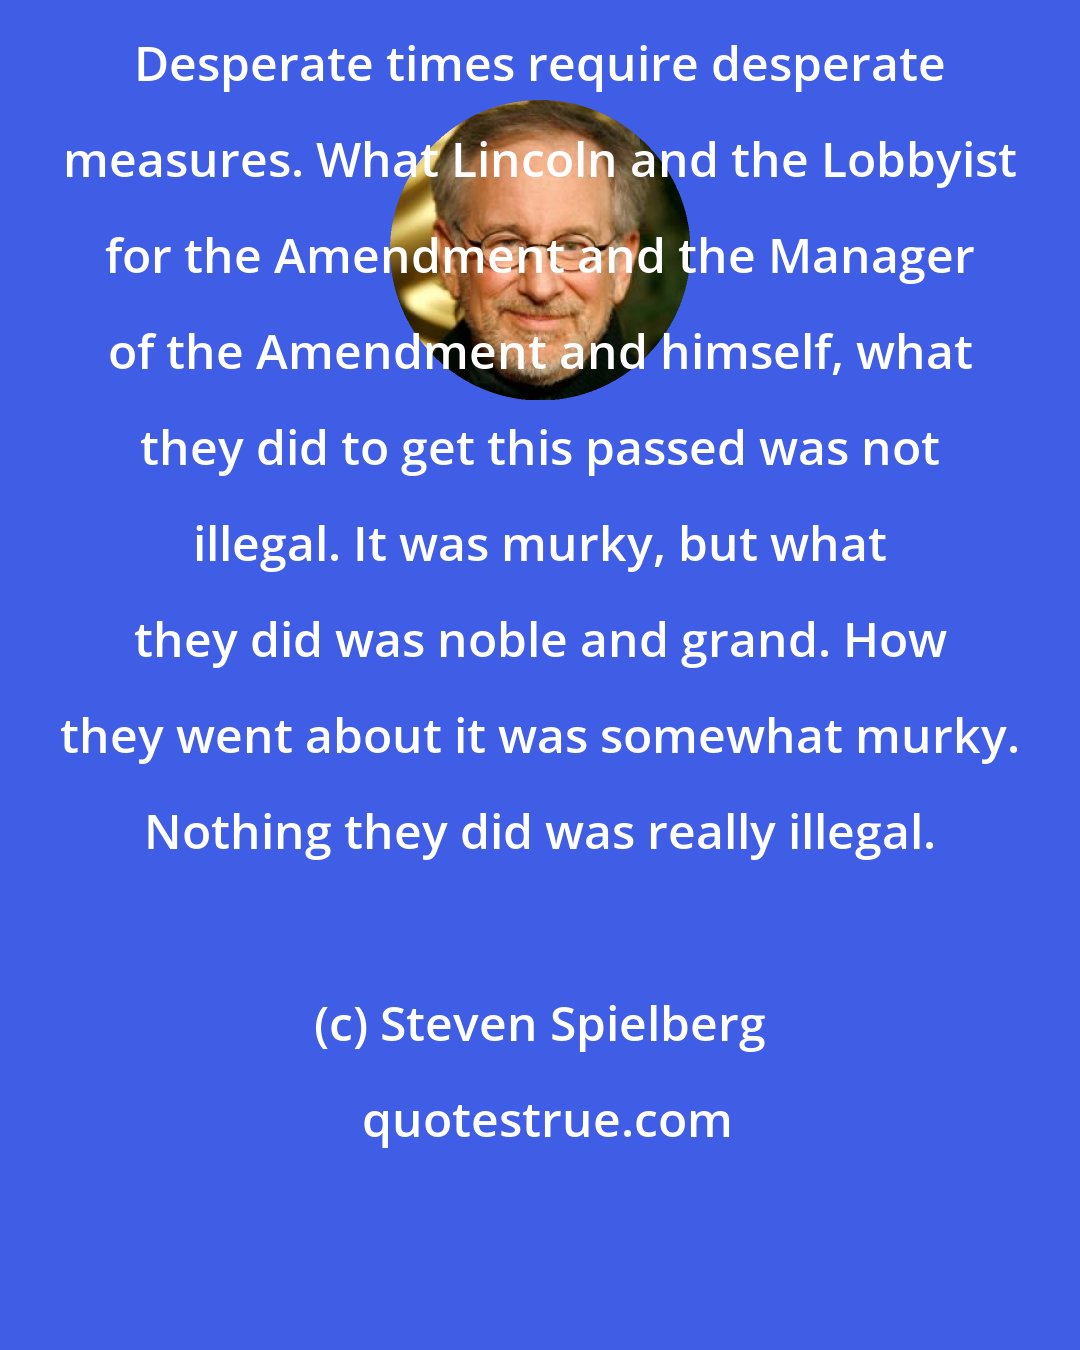 Steven Spielberg: Desperate times require desperate measures. What Lincoln and the Lobbyist for the Amendment and the Manager of the Amendment and himself, what they did to get this passed was not illegal. It was murky, but what they did was noble and grand. How they went about it was somewhat murky. Nothing they did was really illegal.